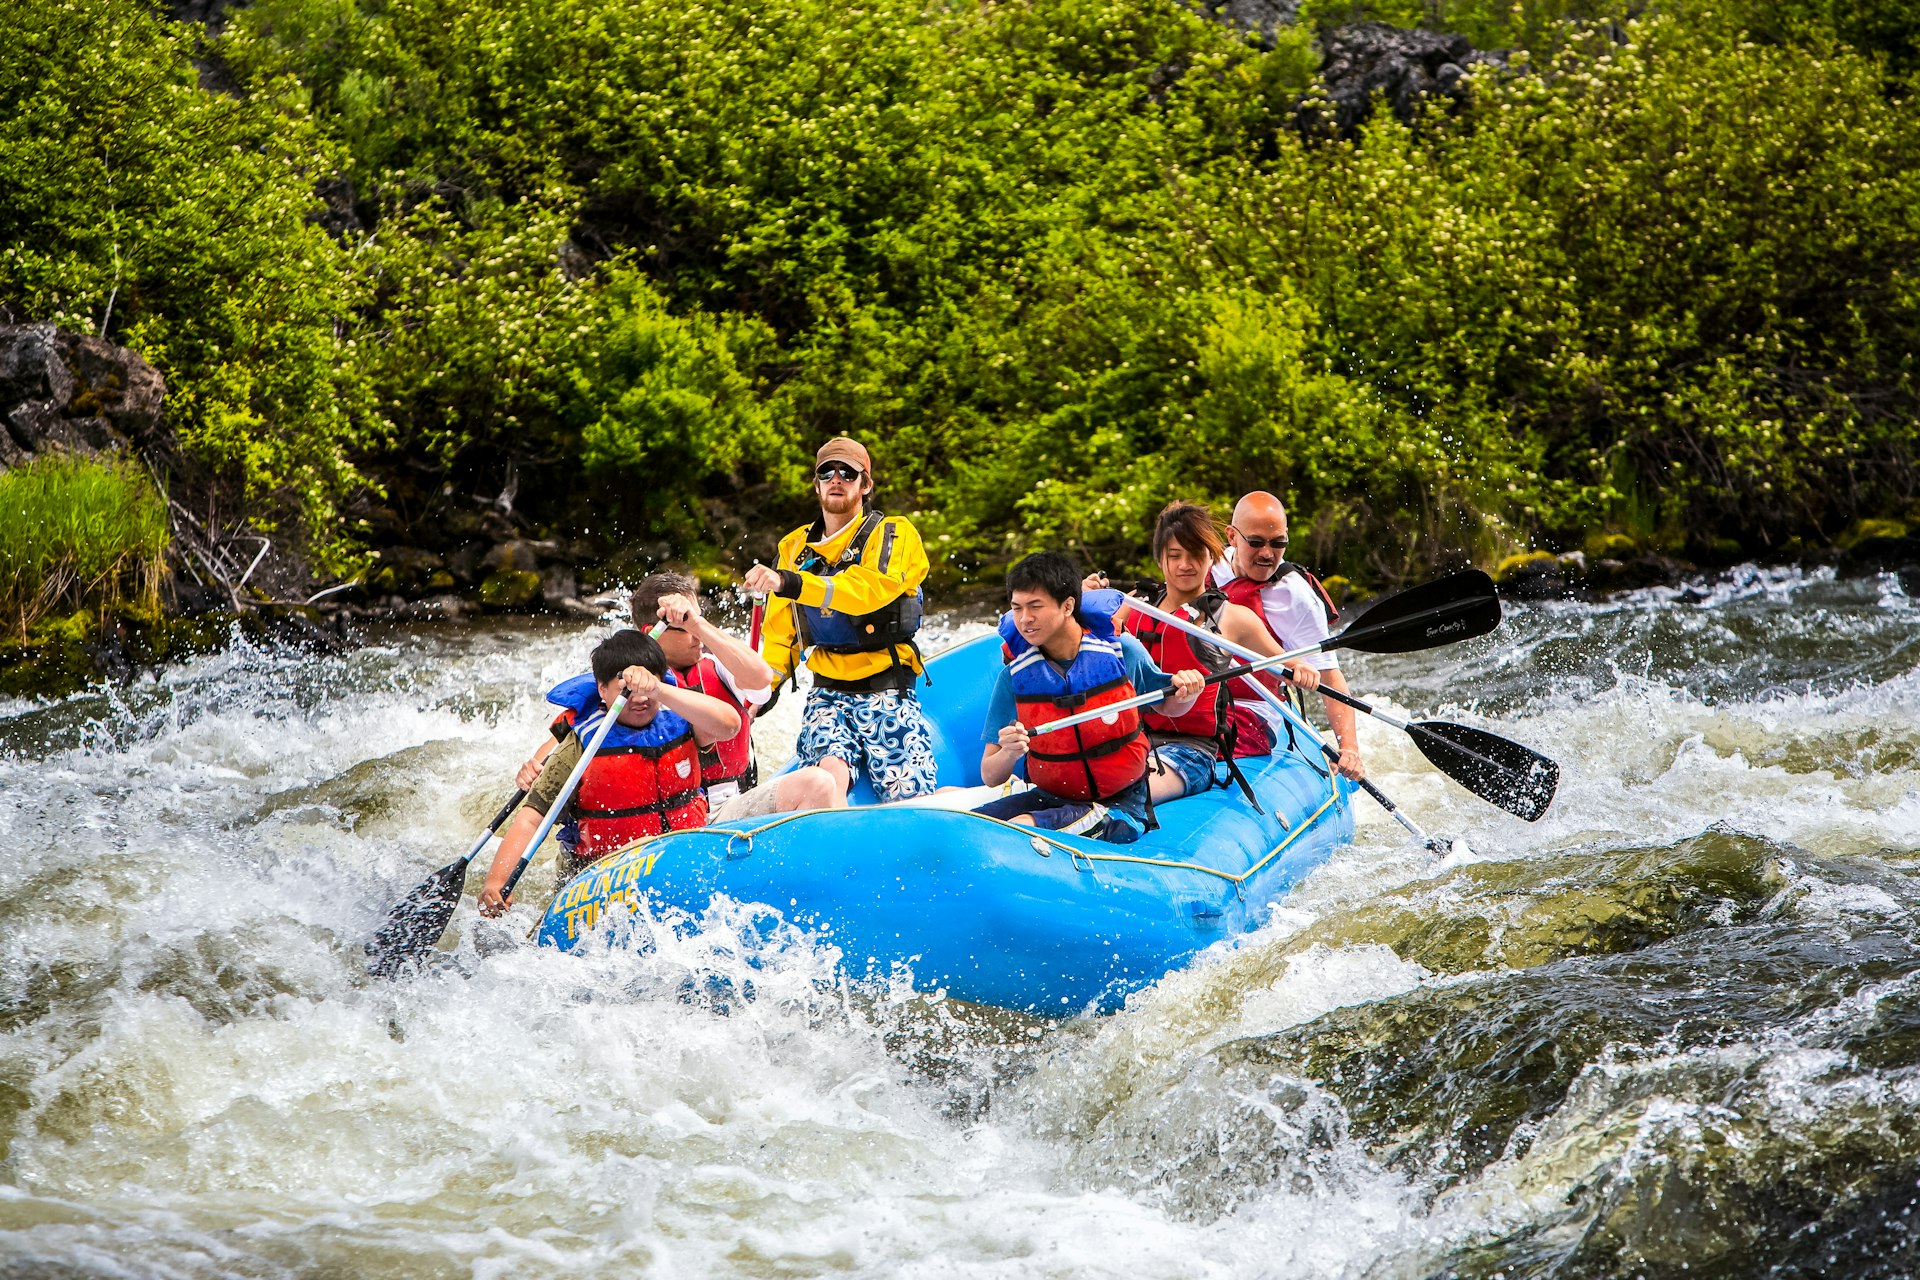 Rafters on a large raft tackle rapids in a river